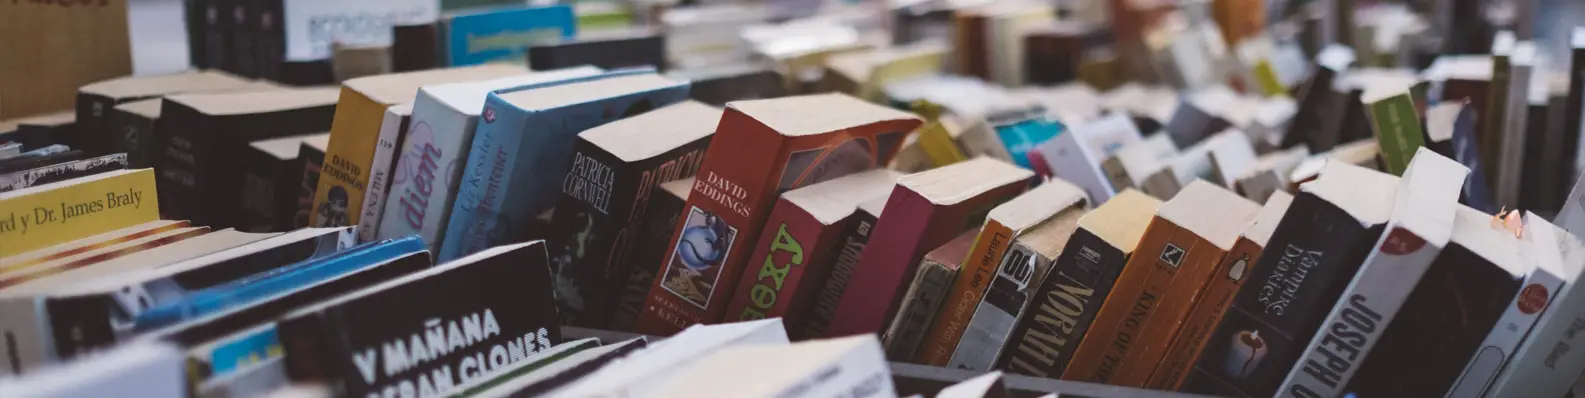 Library Book Sale and Community Events